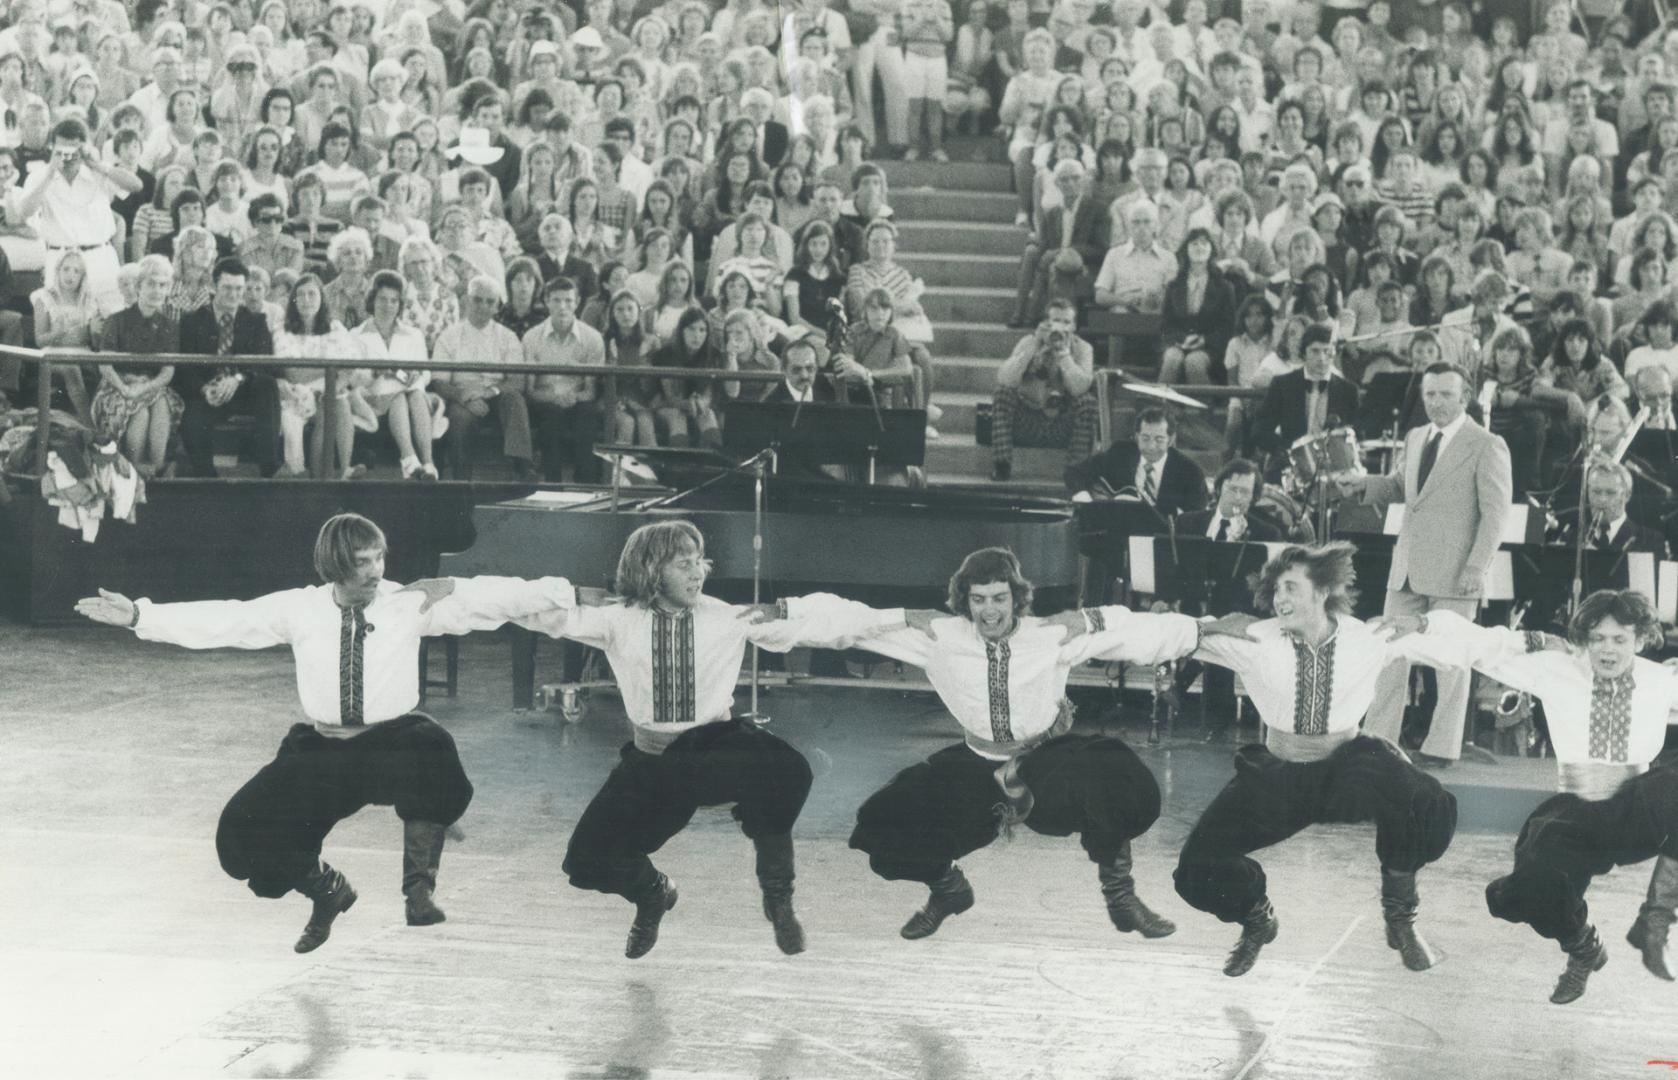 The Ontario Place program included vigorous folk dancers, a magician trampoline performers and a choir from Etobicoke grade schools